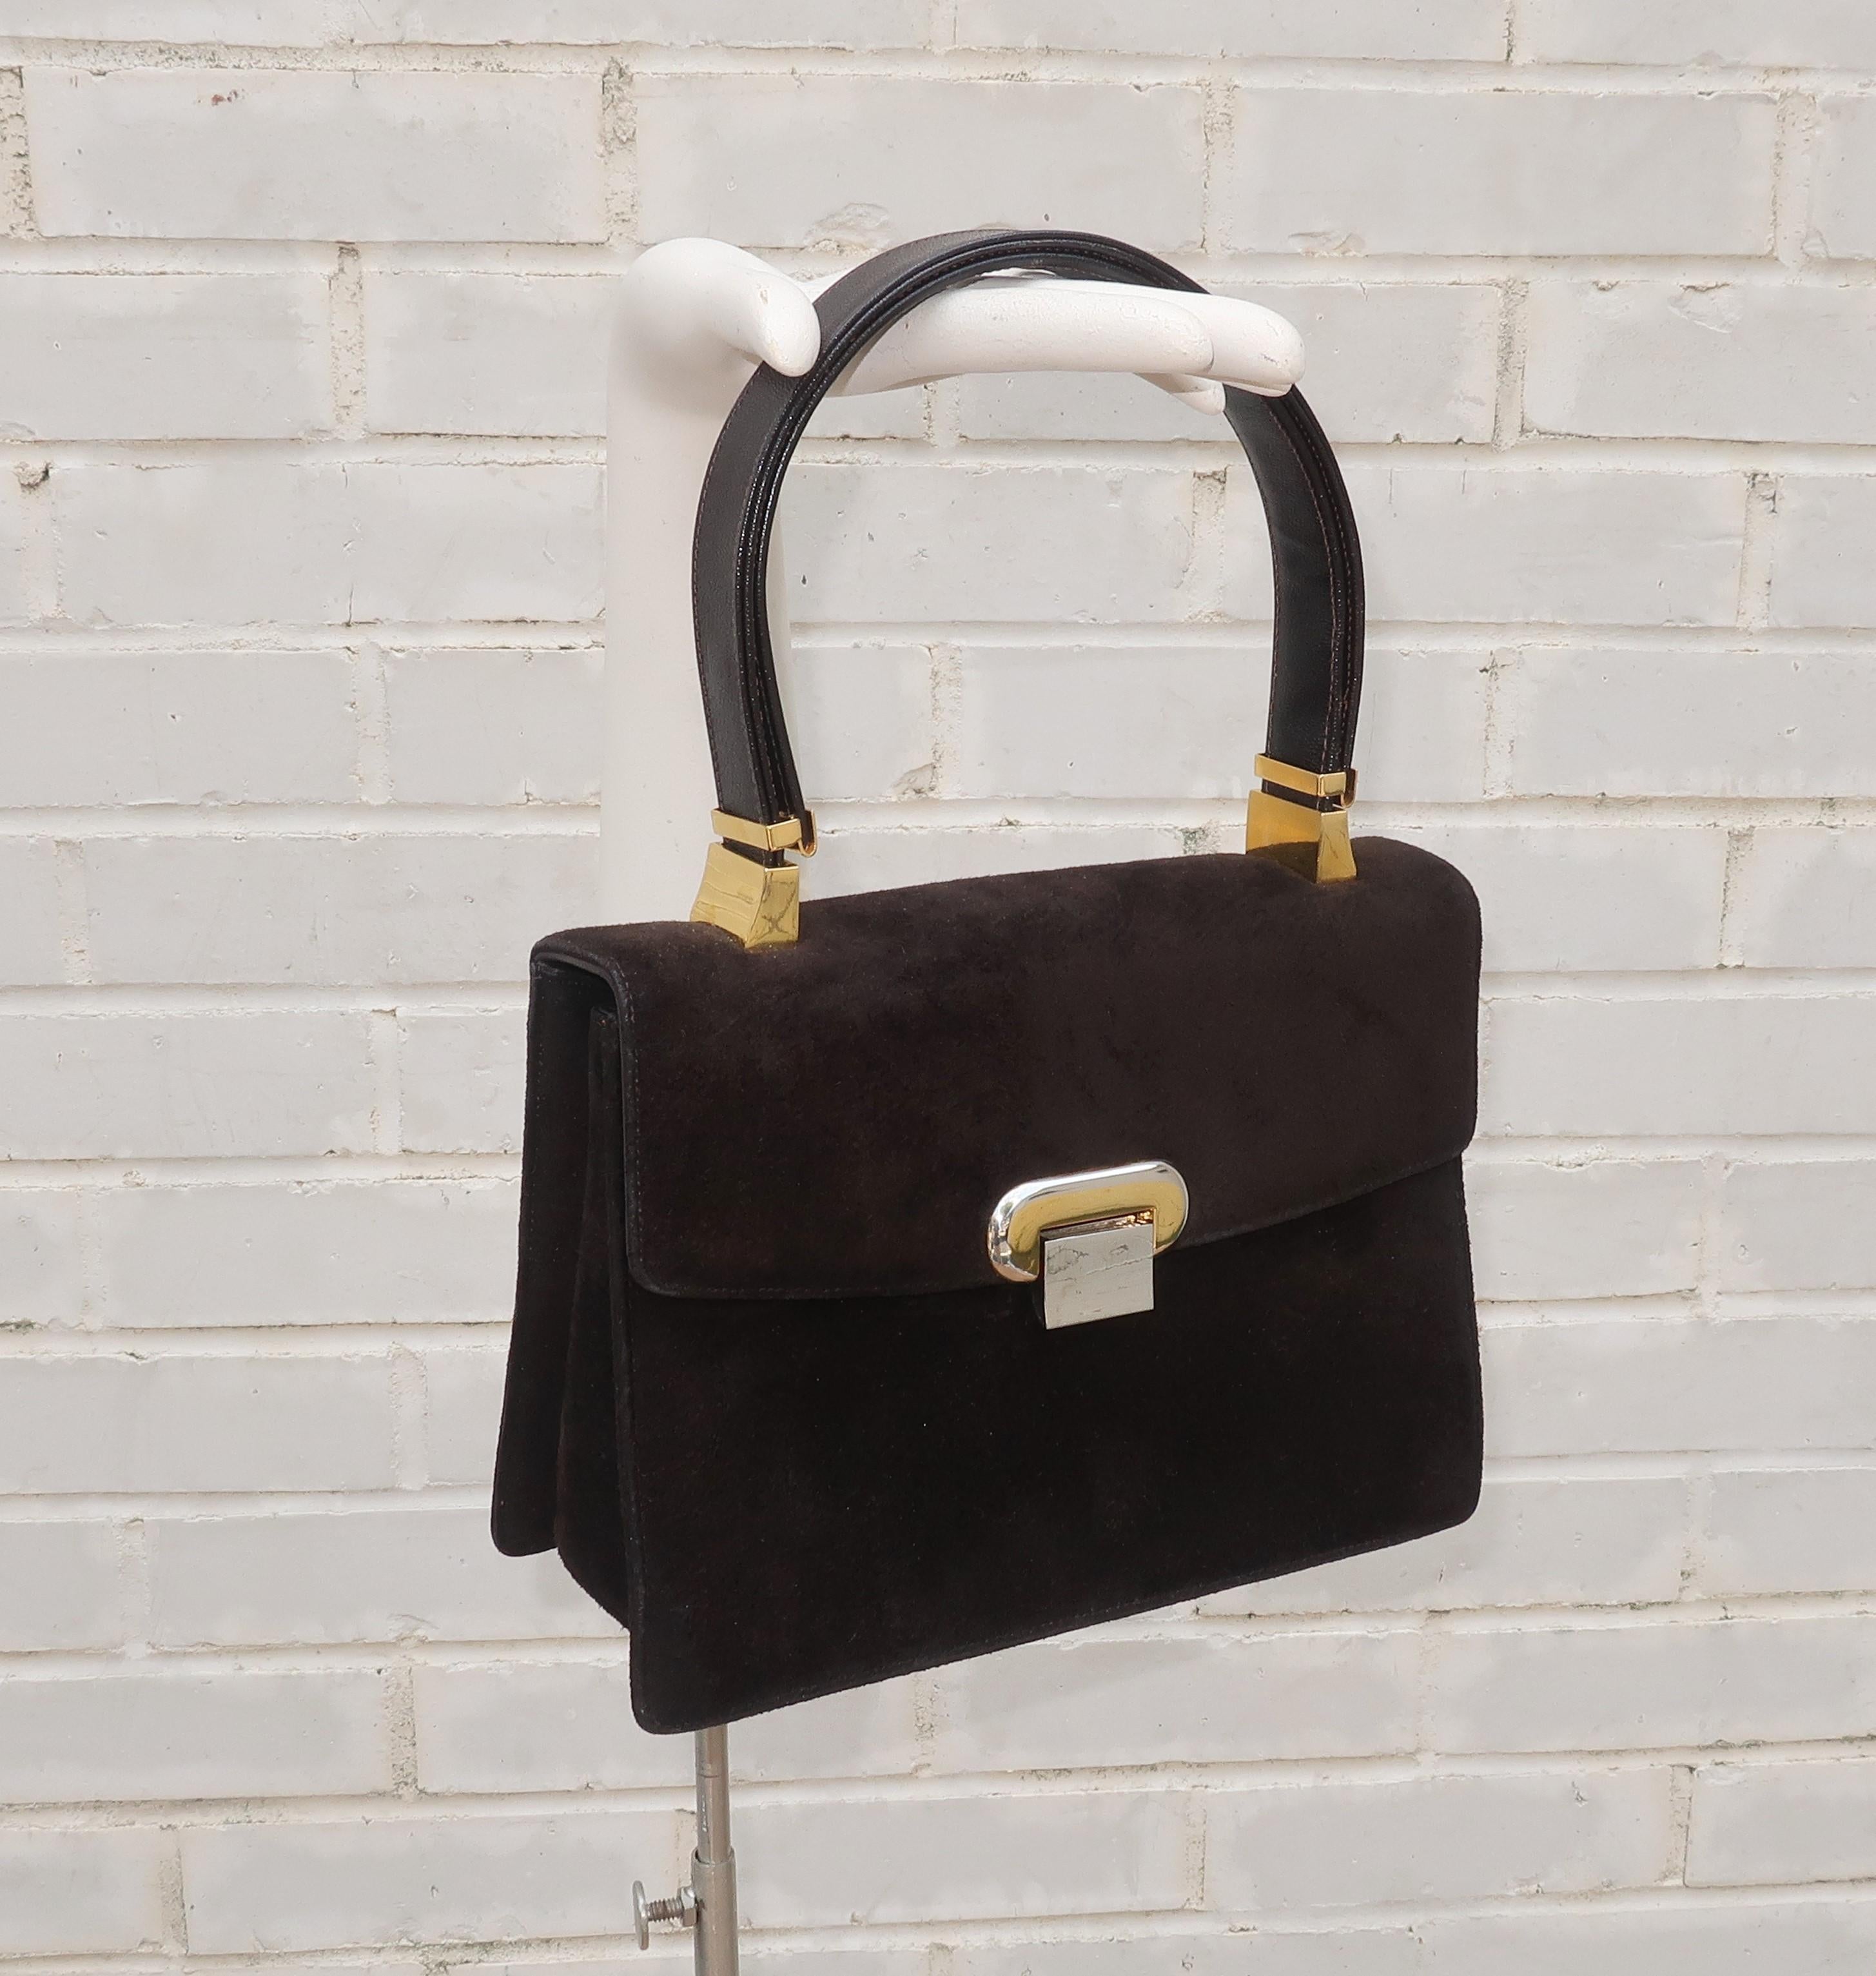 Koret started producing fine handbags in 1929 and ushered in every decade with stylish designs fabricated from quality materials which sold in upscale department stores and boutiques.  This 1960's dark brown suede handbag has the sophistication of a